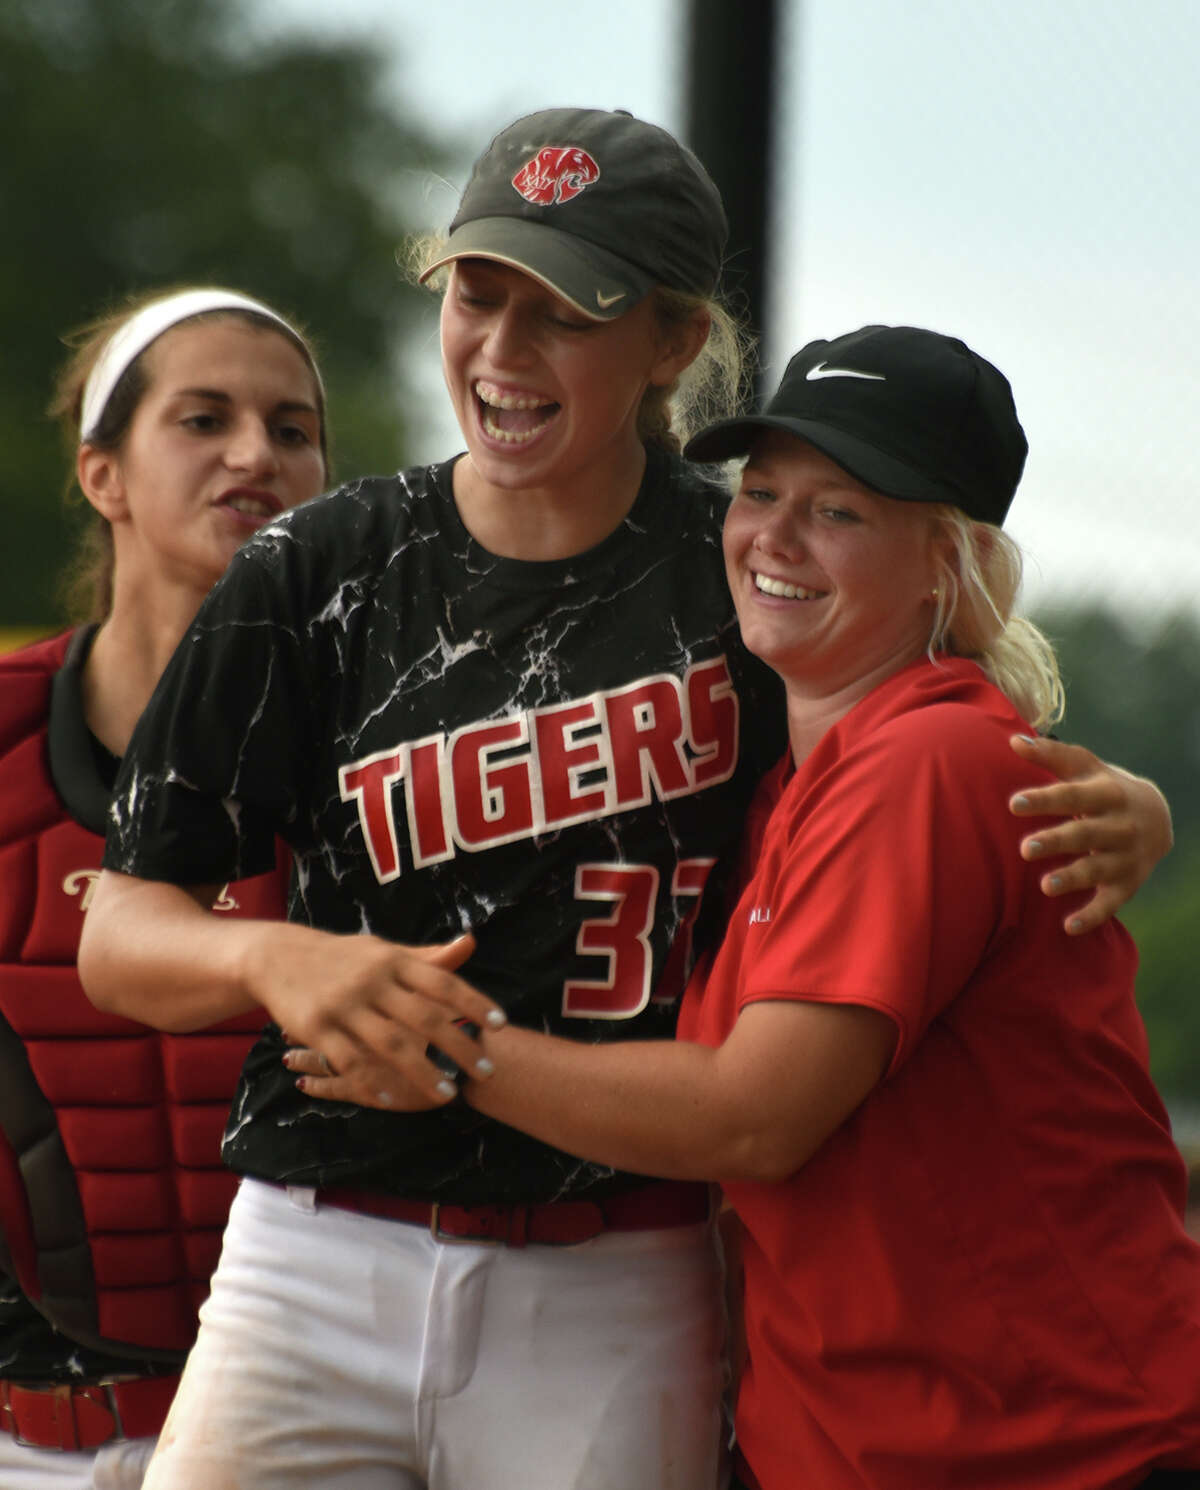 Katy junior pitcher Kylie Redding, center, gets a hug from acting head coach Meghan Brown after finishing game 3 of the Tiger's Region III-6A semifinal playoff series matchup against Alvin at Katy High School on May 21, 2016. (Photo by Jerry Baker/Freelance)